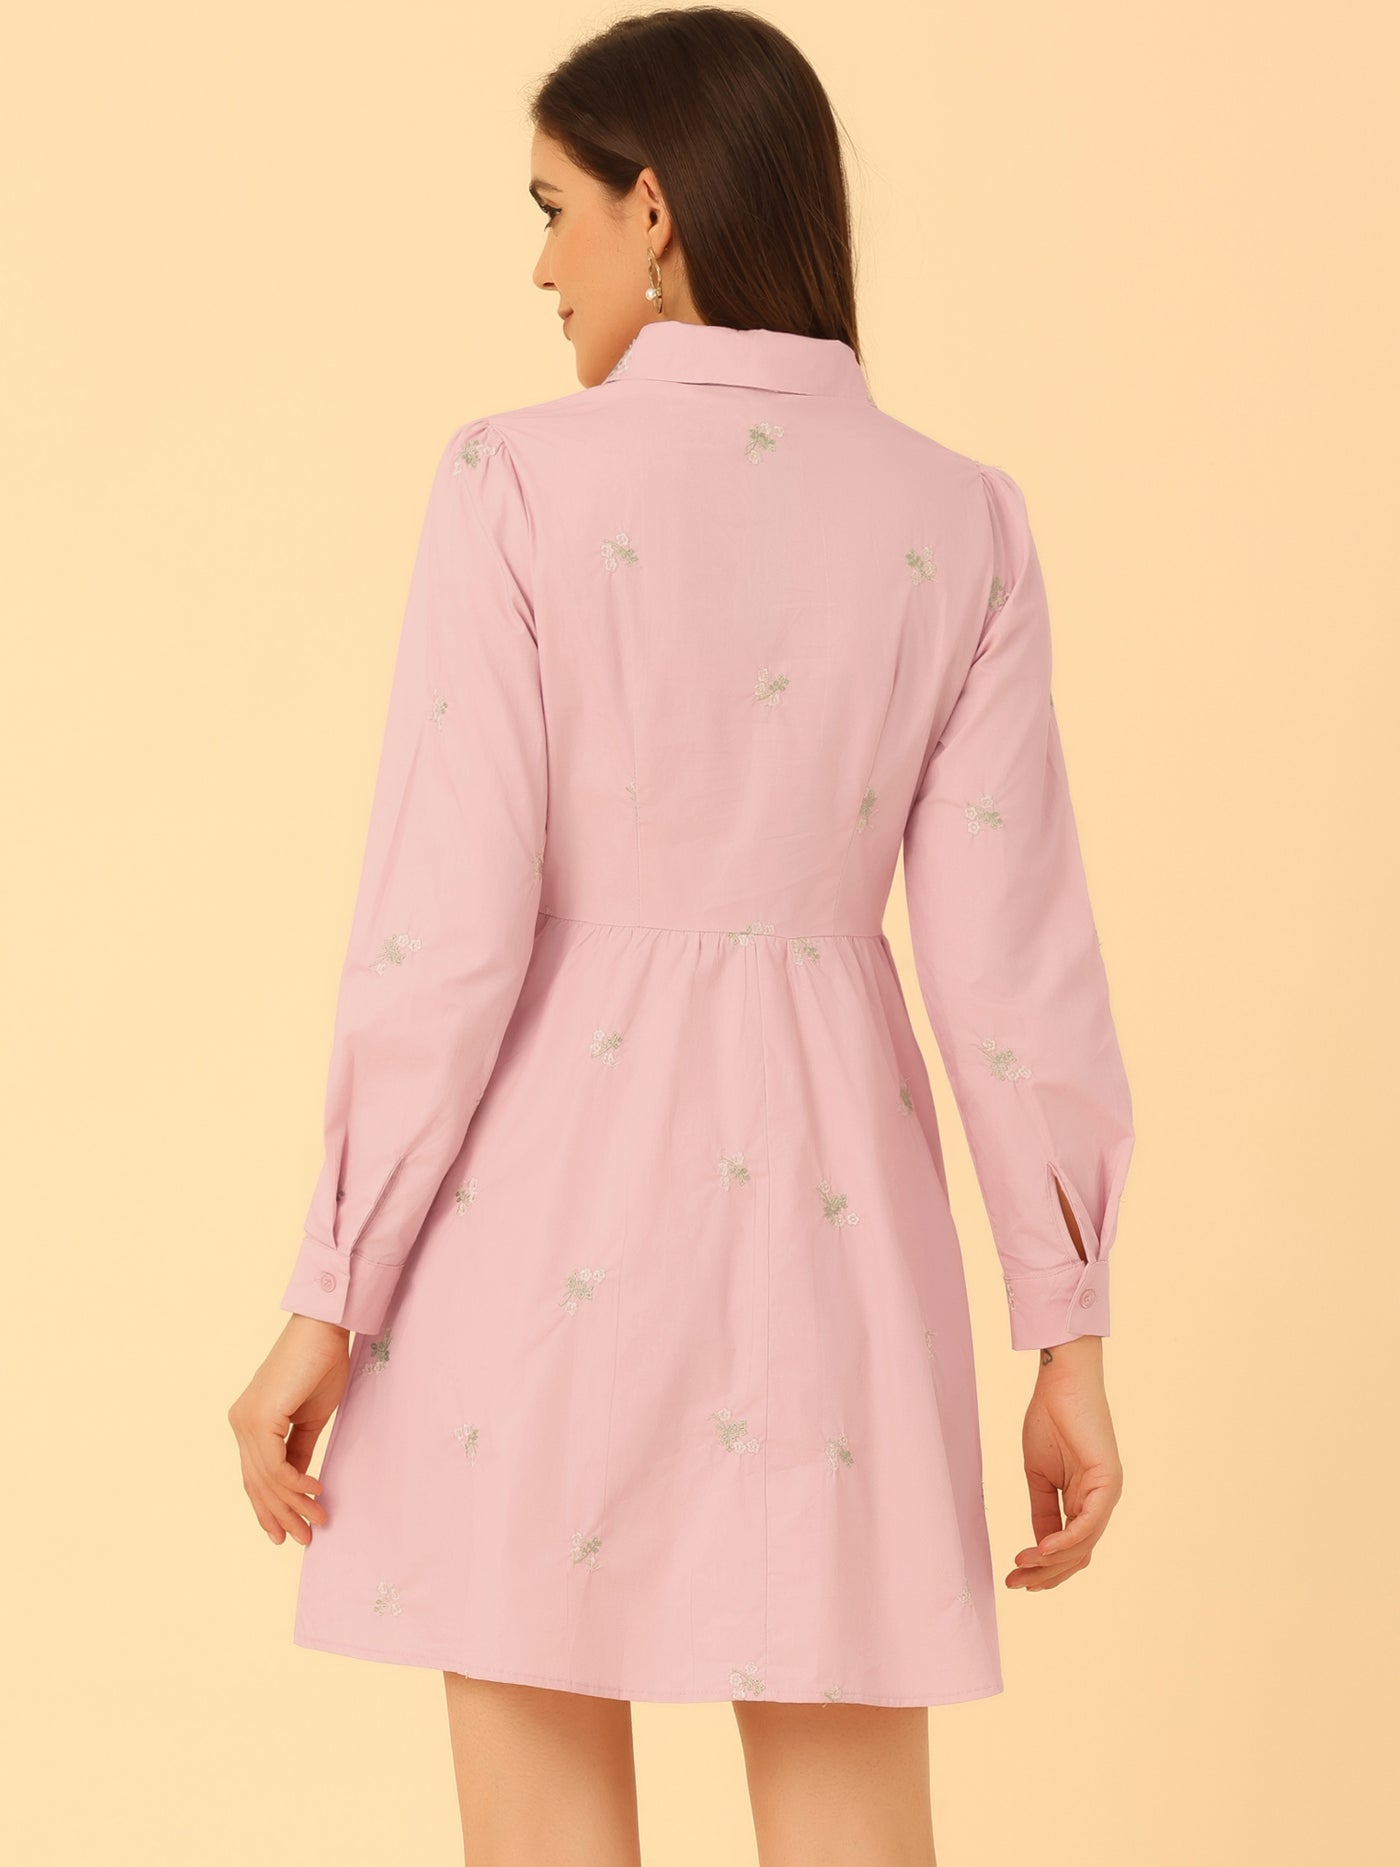 Allegra K Casual Long Sleeve Half Placket Embroidered Floral Mini Shirt Dress